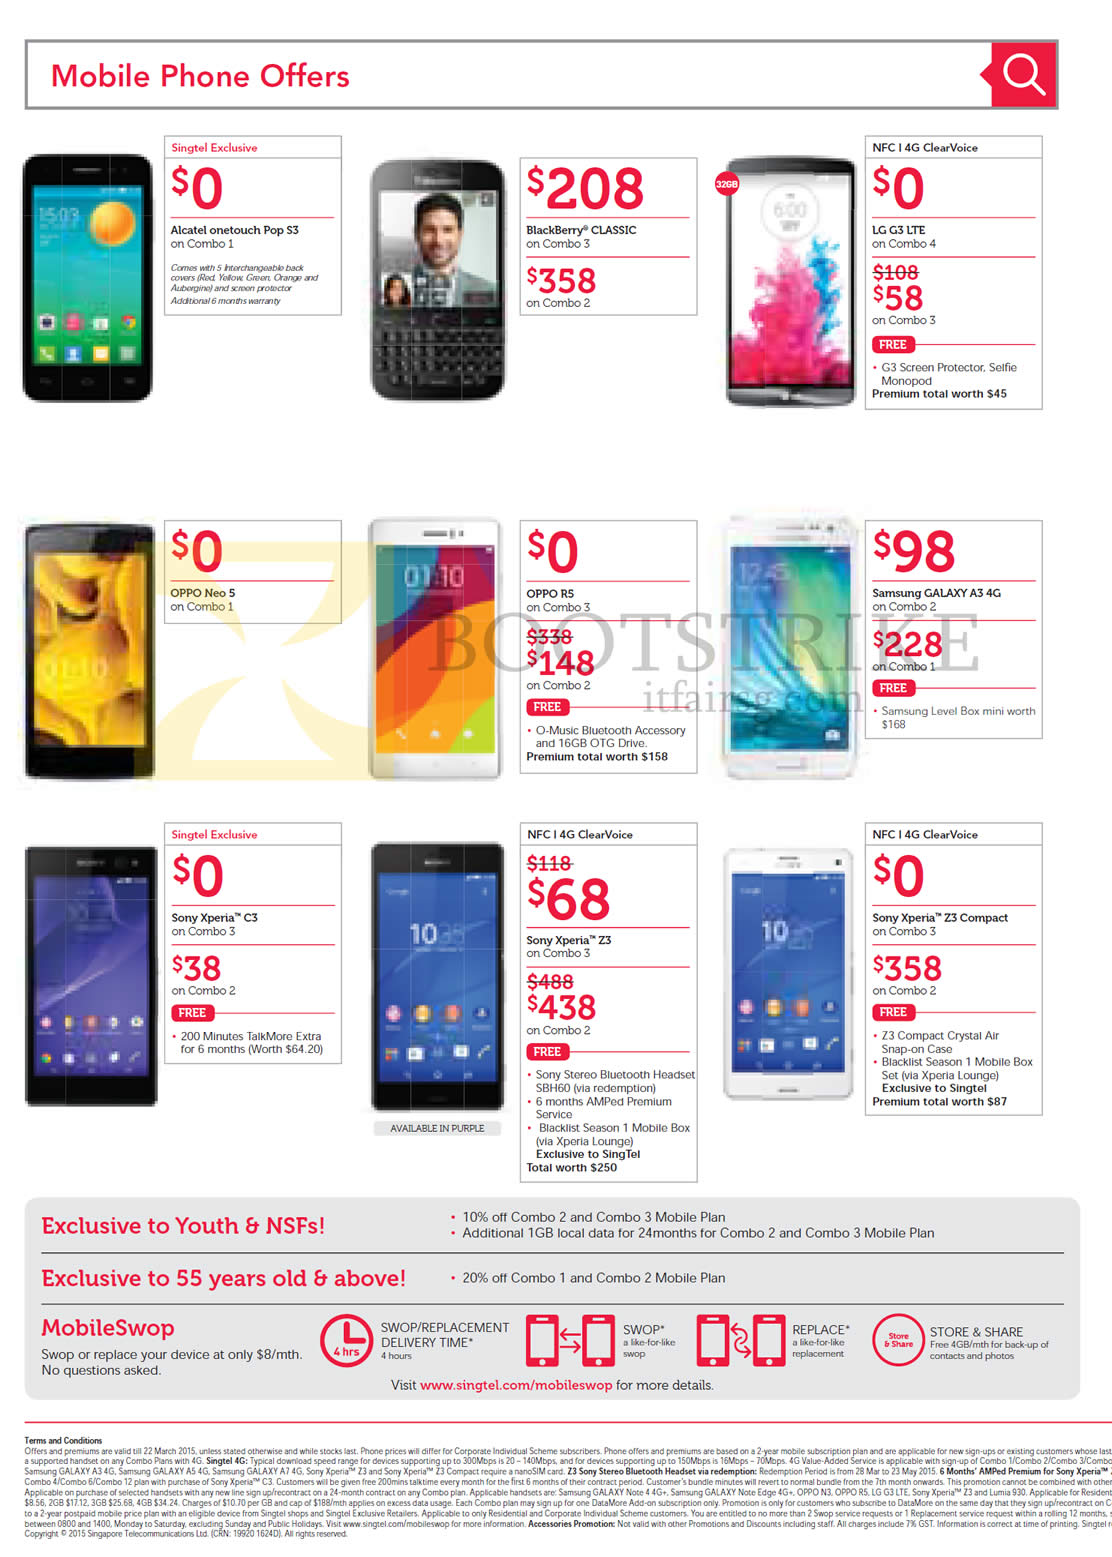 IT SHOW 2015 price list image brochure of Singtel Mobile Phones Alcatel Onetouch Pop S3, BlackBerry CLASSIC, LG G3, OPPO Neo 5, R5, Samsung GALAXY A3, Sony Xperia C3, Z3, Z3